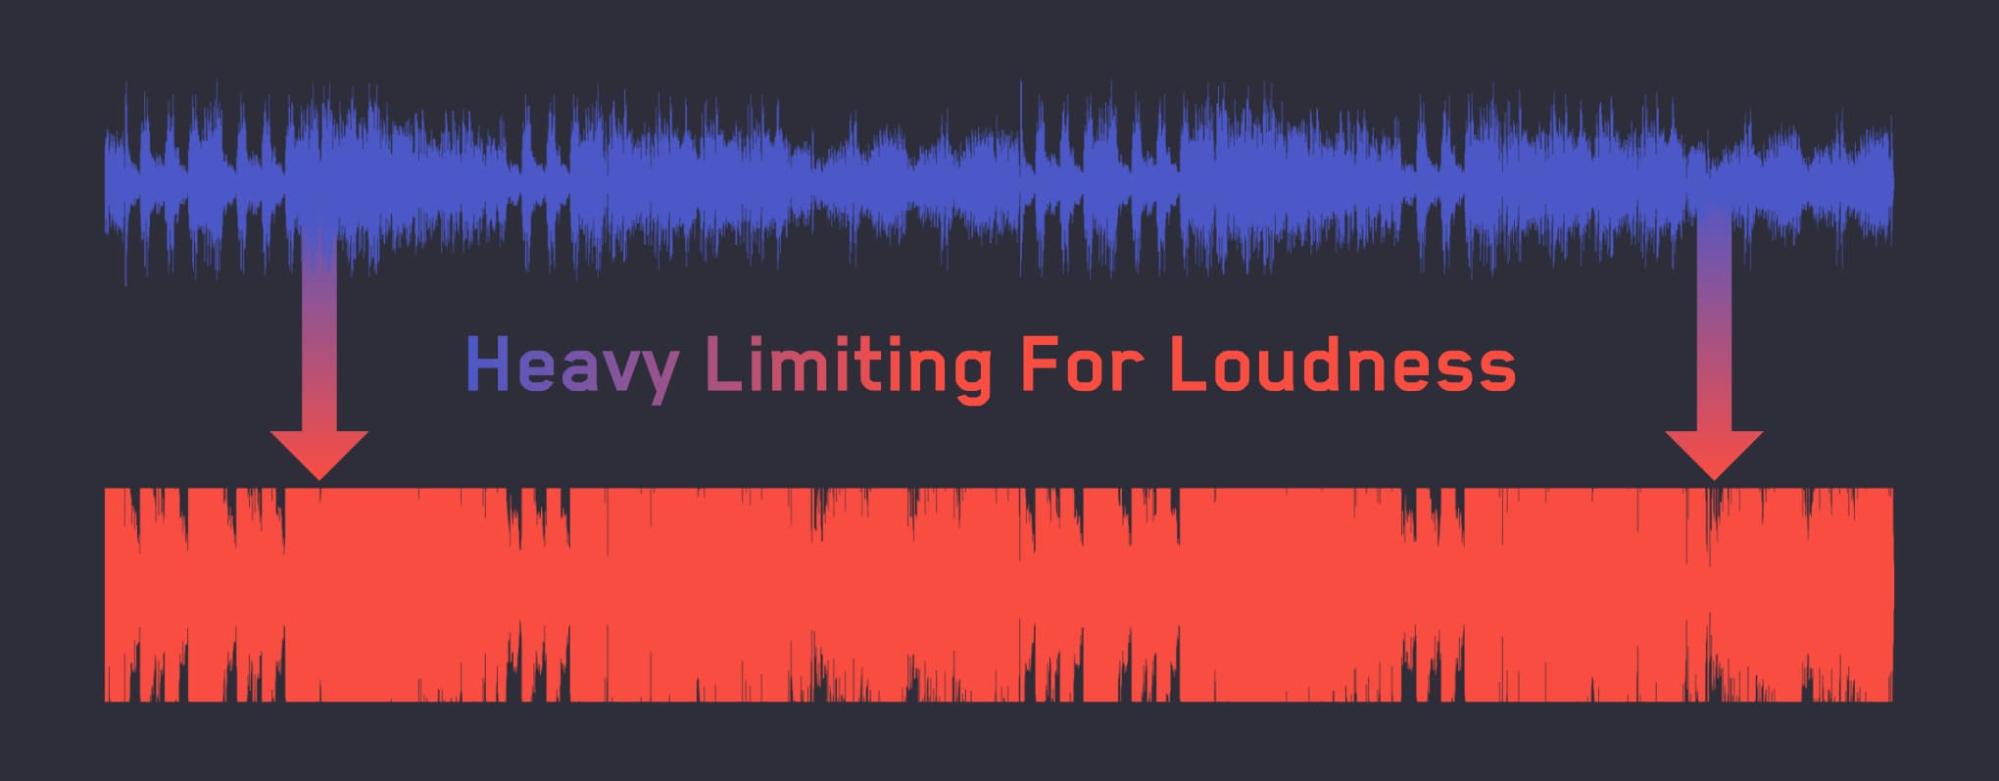 Before audio normalization and streaming sites, most music was compressed and limited to achieve the maximum possible loudness.